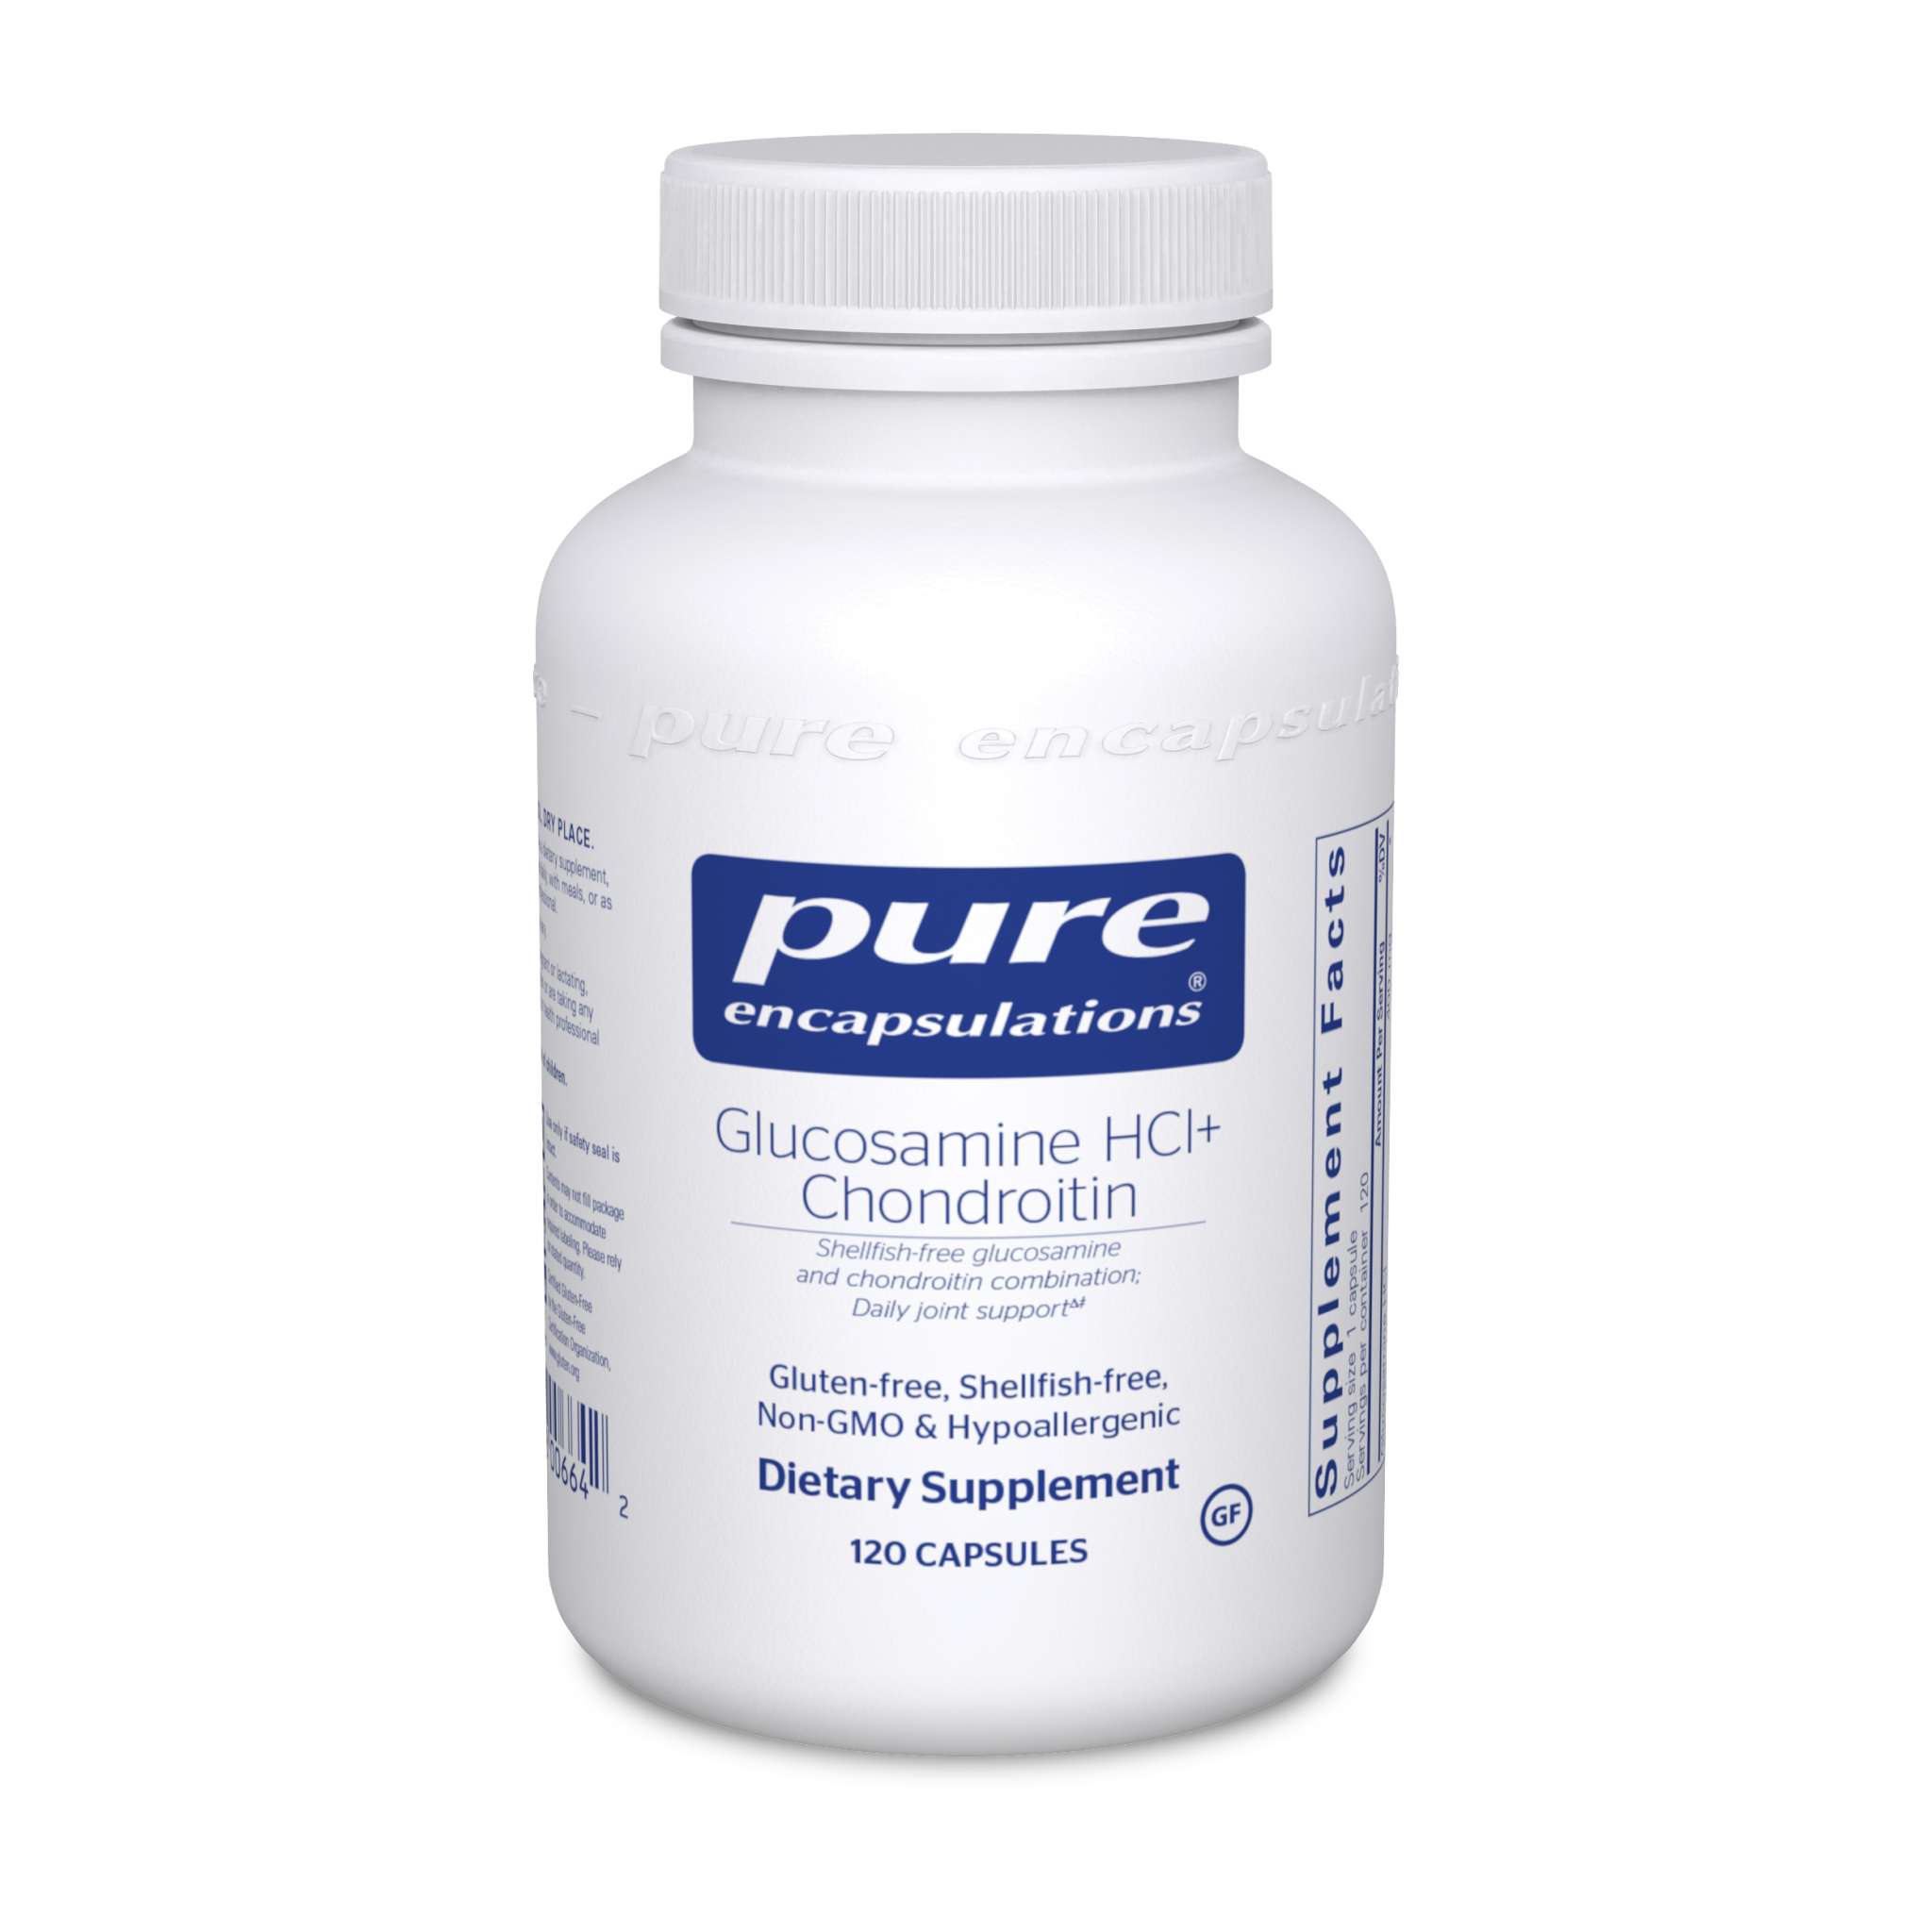 Pure Encapsulations - Glucos Hcl + Chondroitin